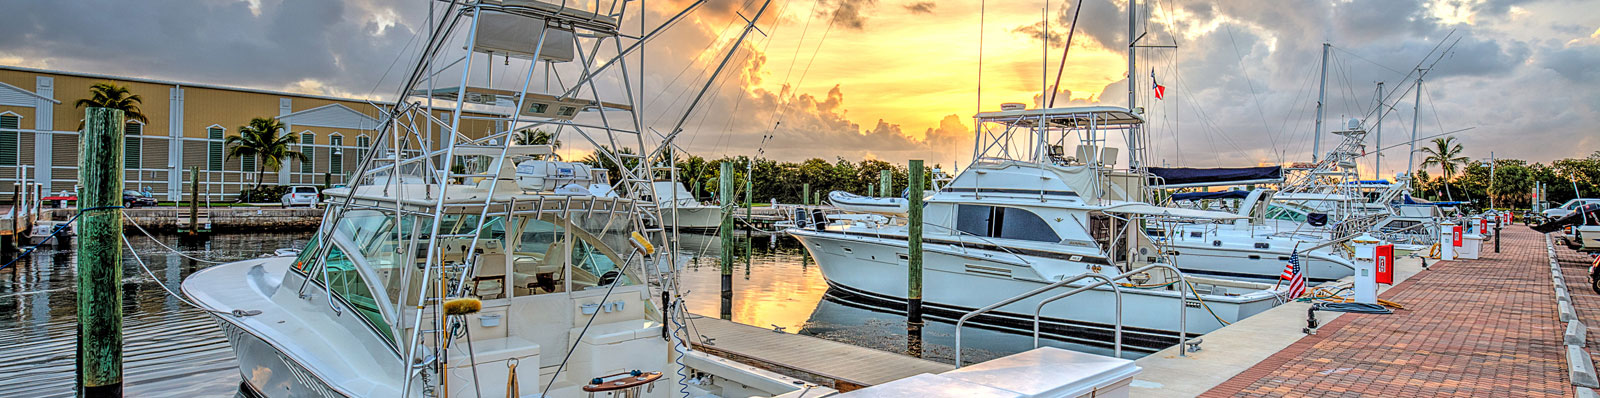 While Cruising in Florida, Don’t Miss a Florida Marina Club Experience